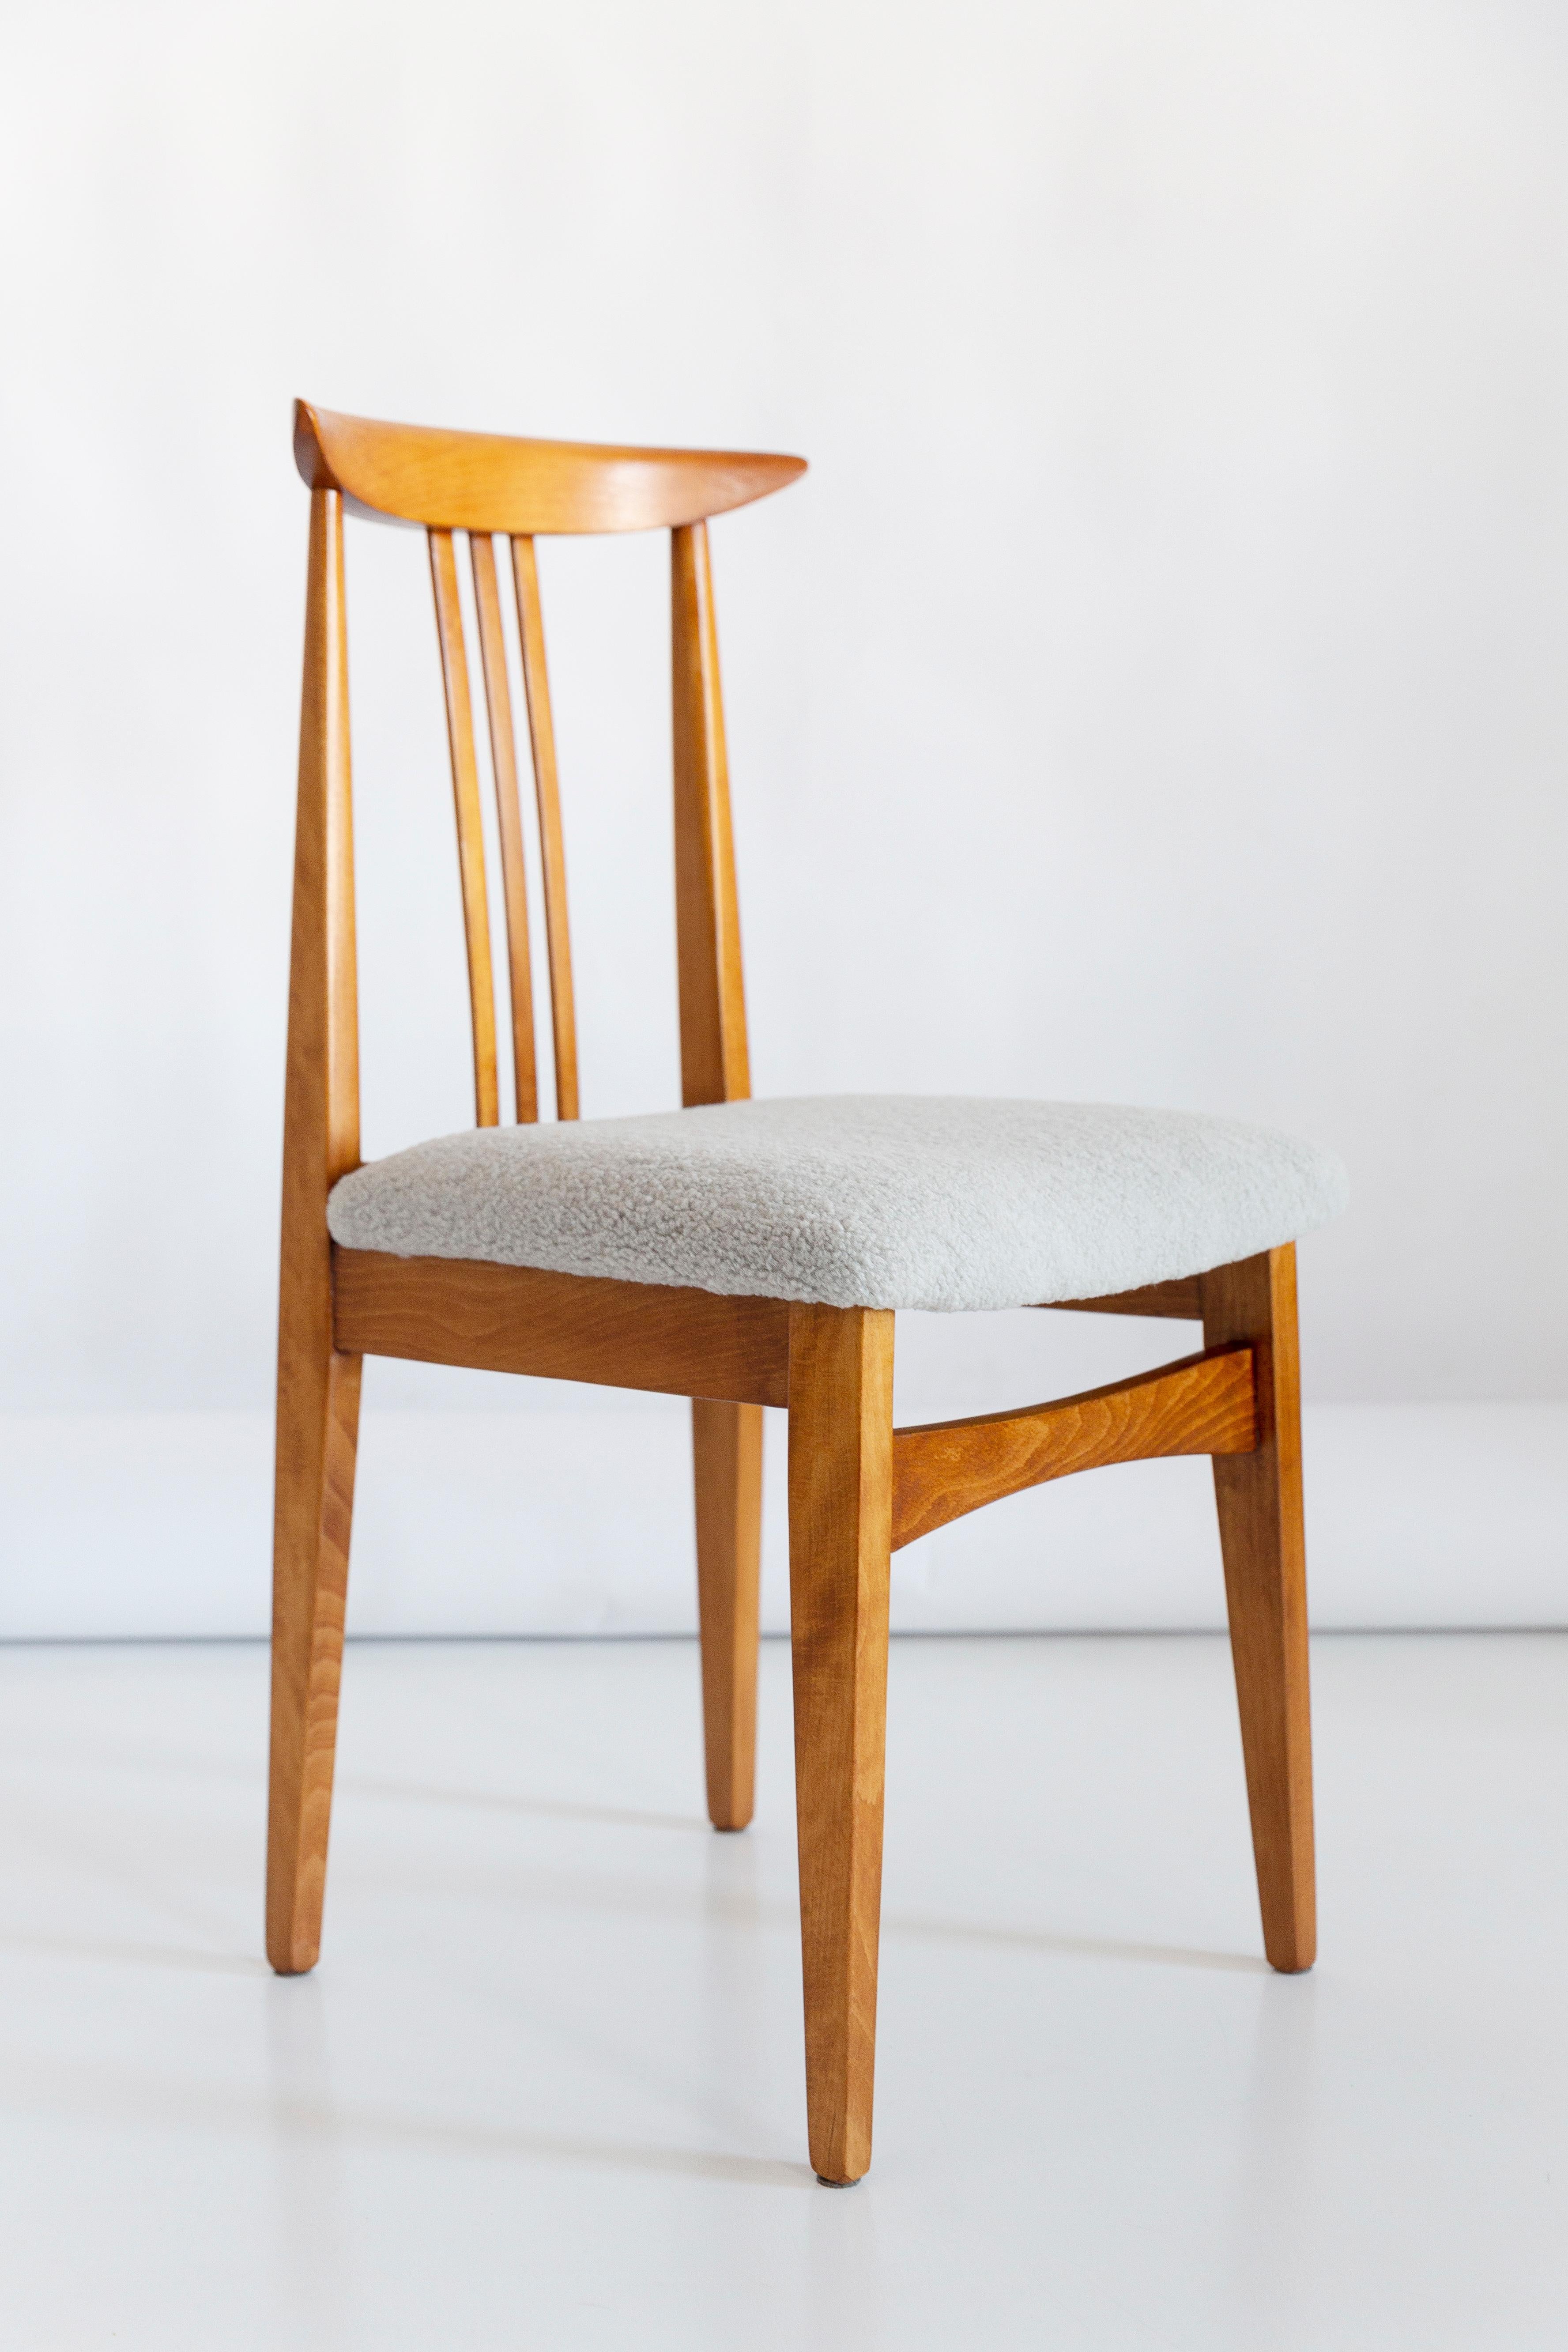 Polish Mid-Century Modern Linen Boucle Chair, Designed by M. Zielinski, Europe, 1960s For Sale